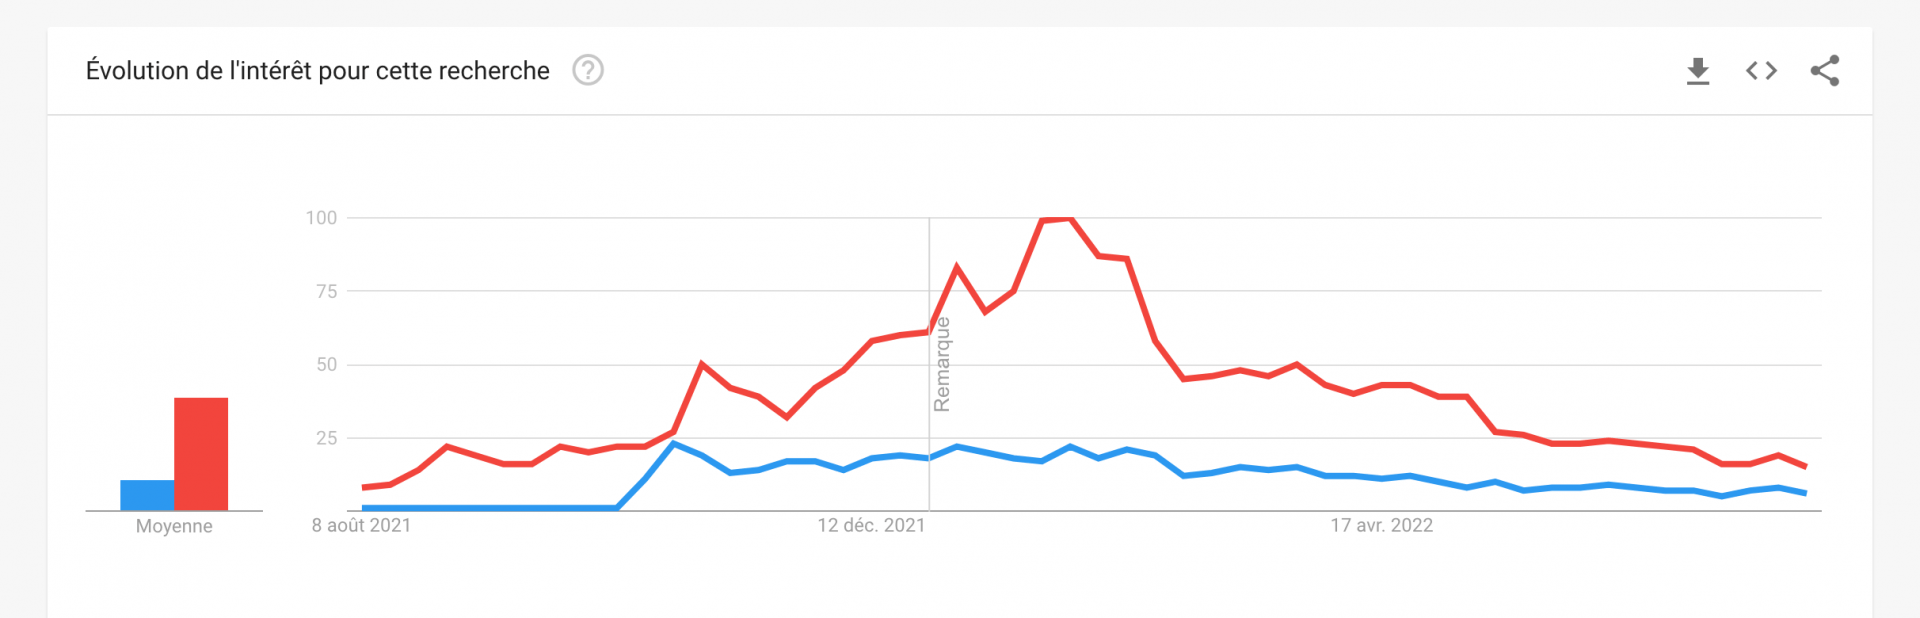 Comparison of the interest of the terms NFT and Metaverse. Source: Google Trends.